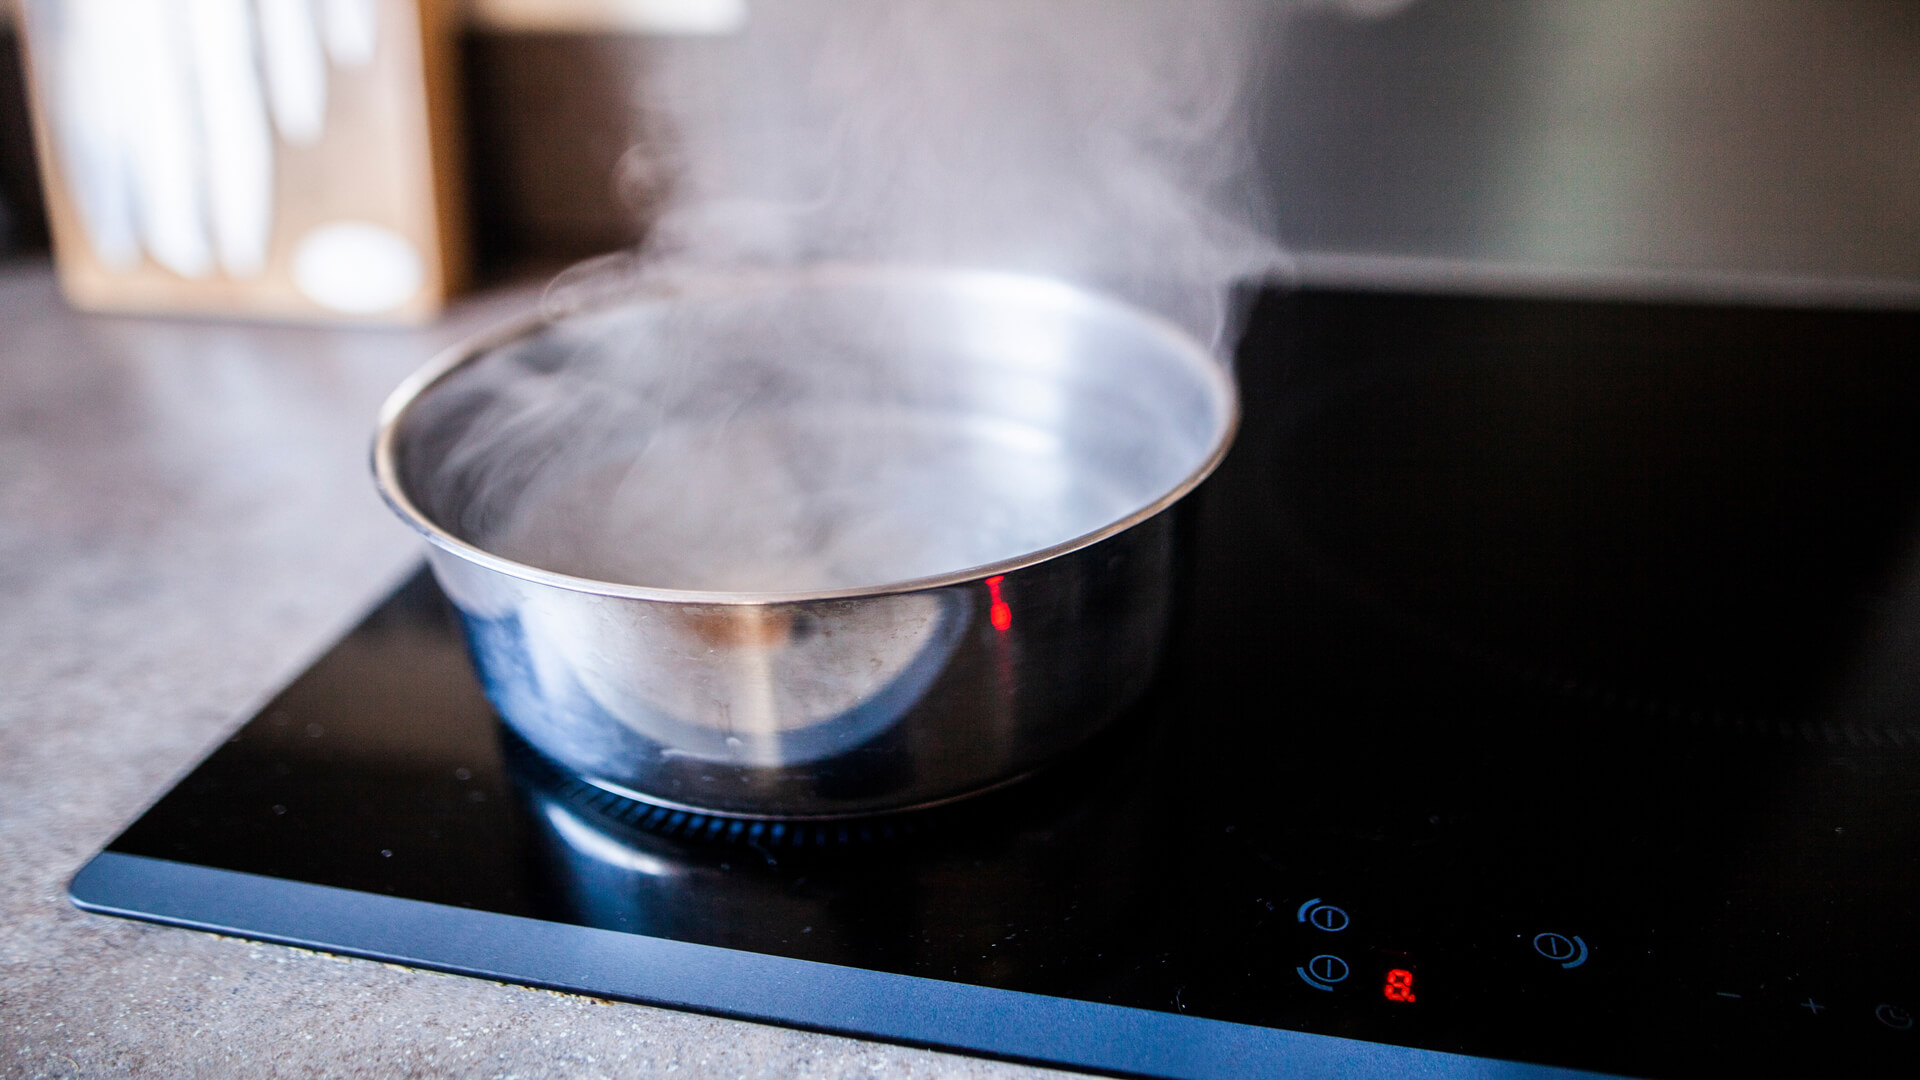 The phrase "a watched pot never boils" has clearly never met an induction stove before.